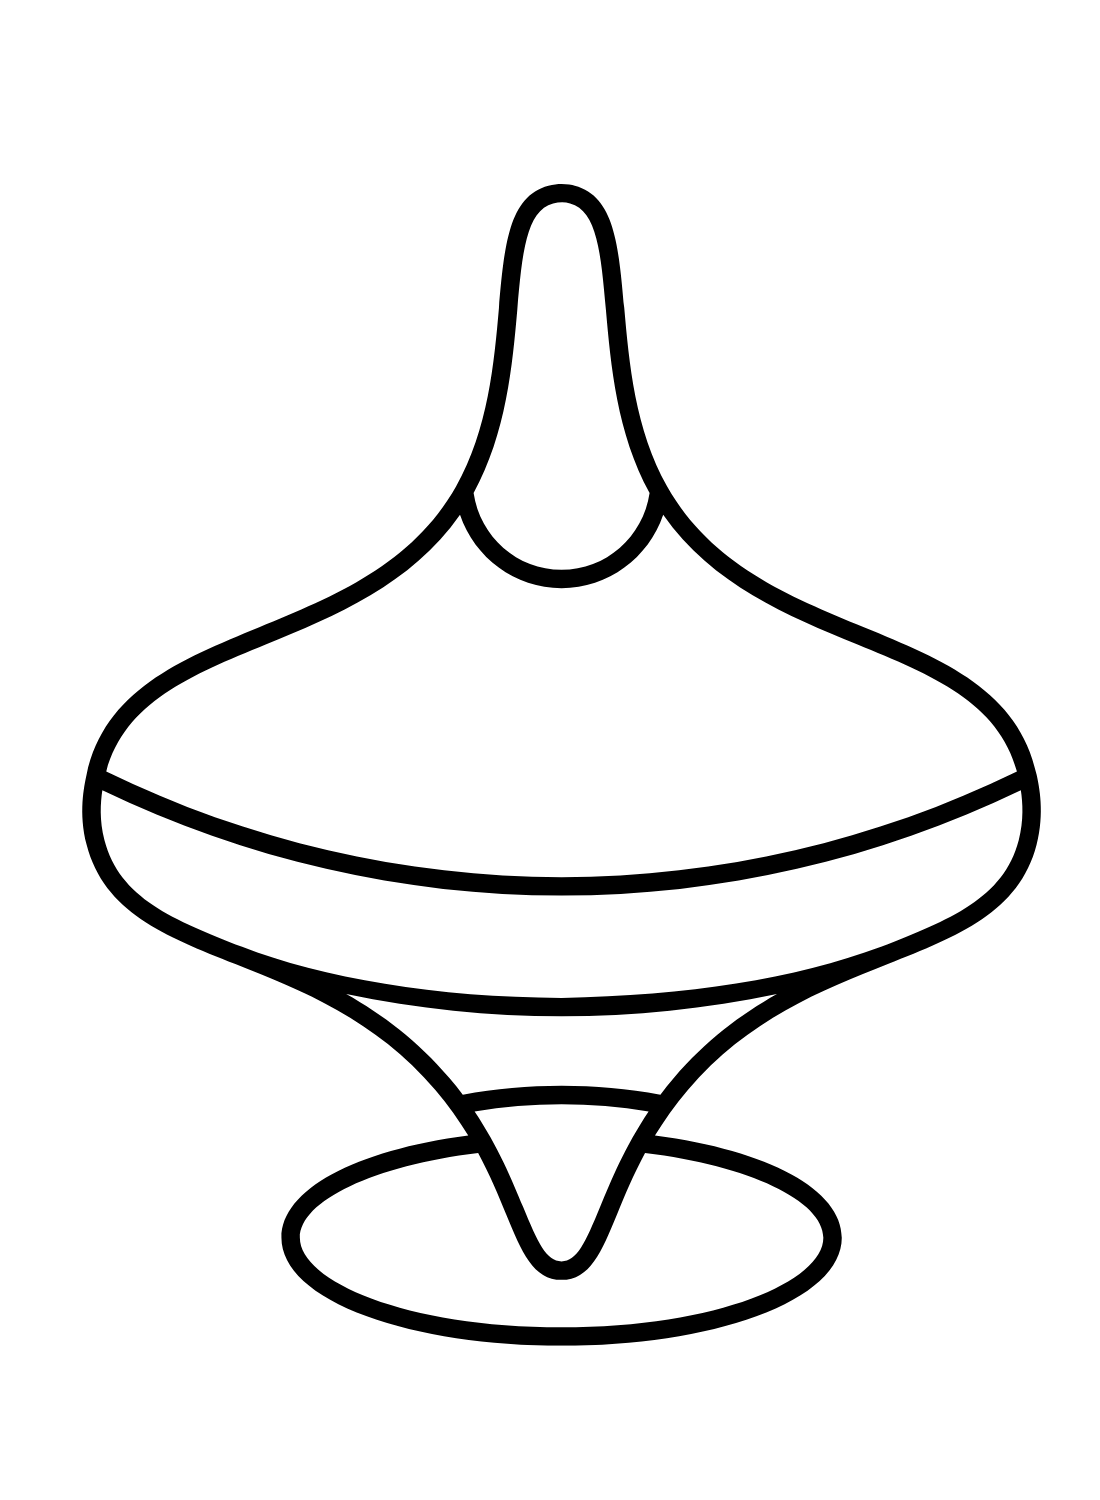 Whirligig for Children Coloring Page